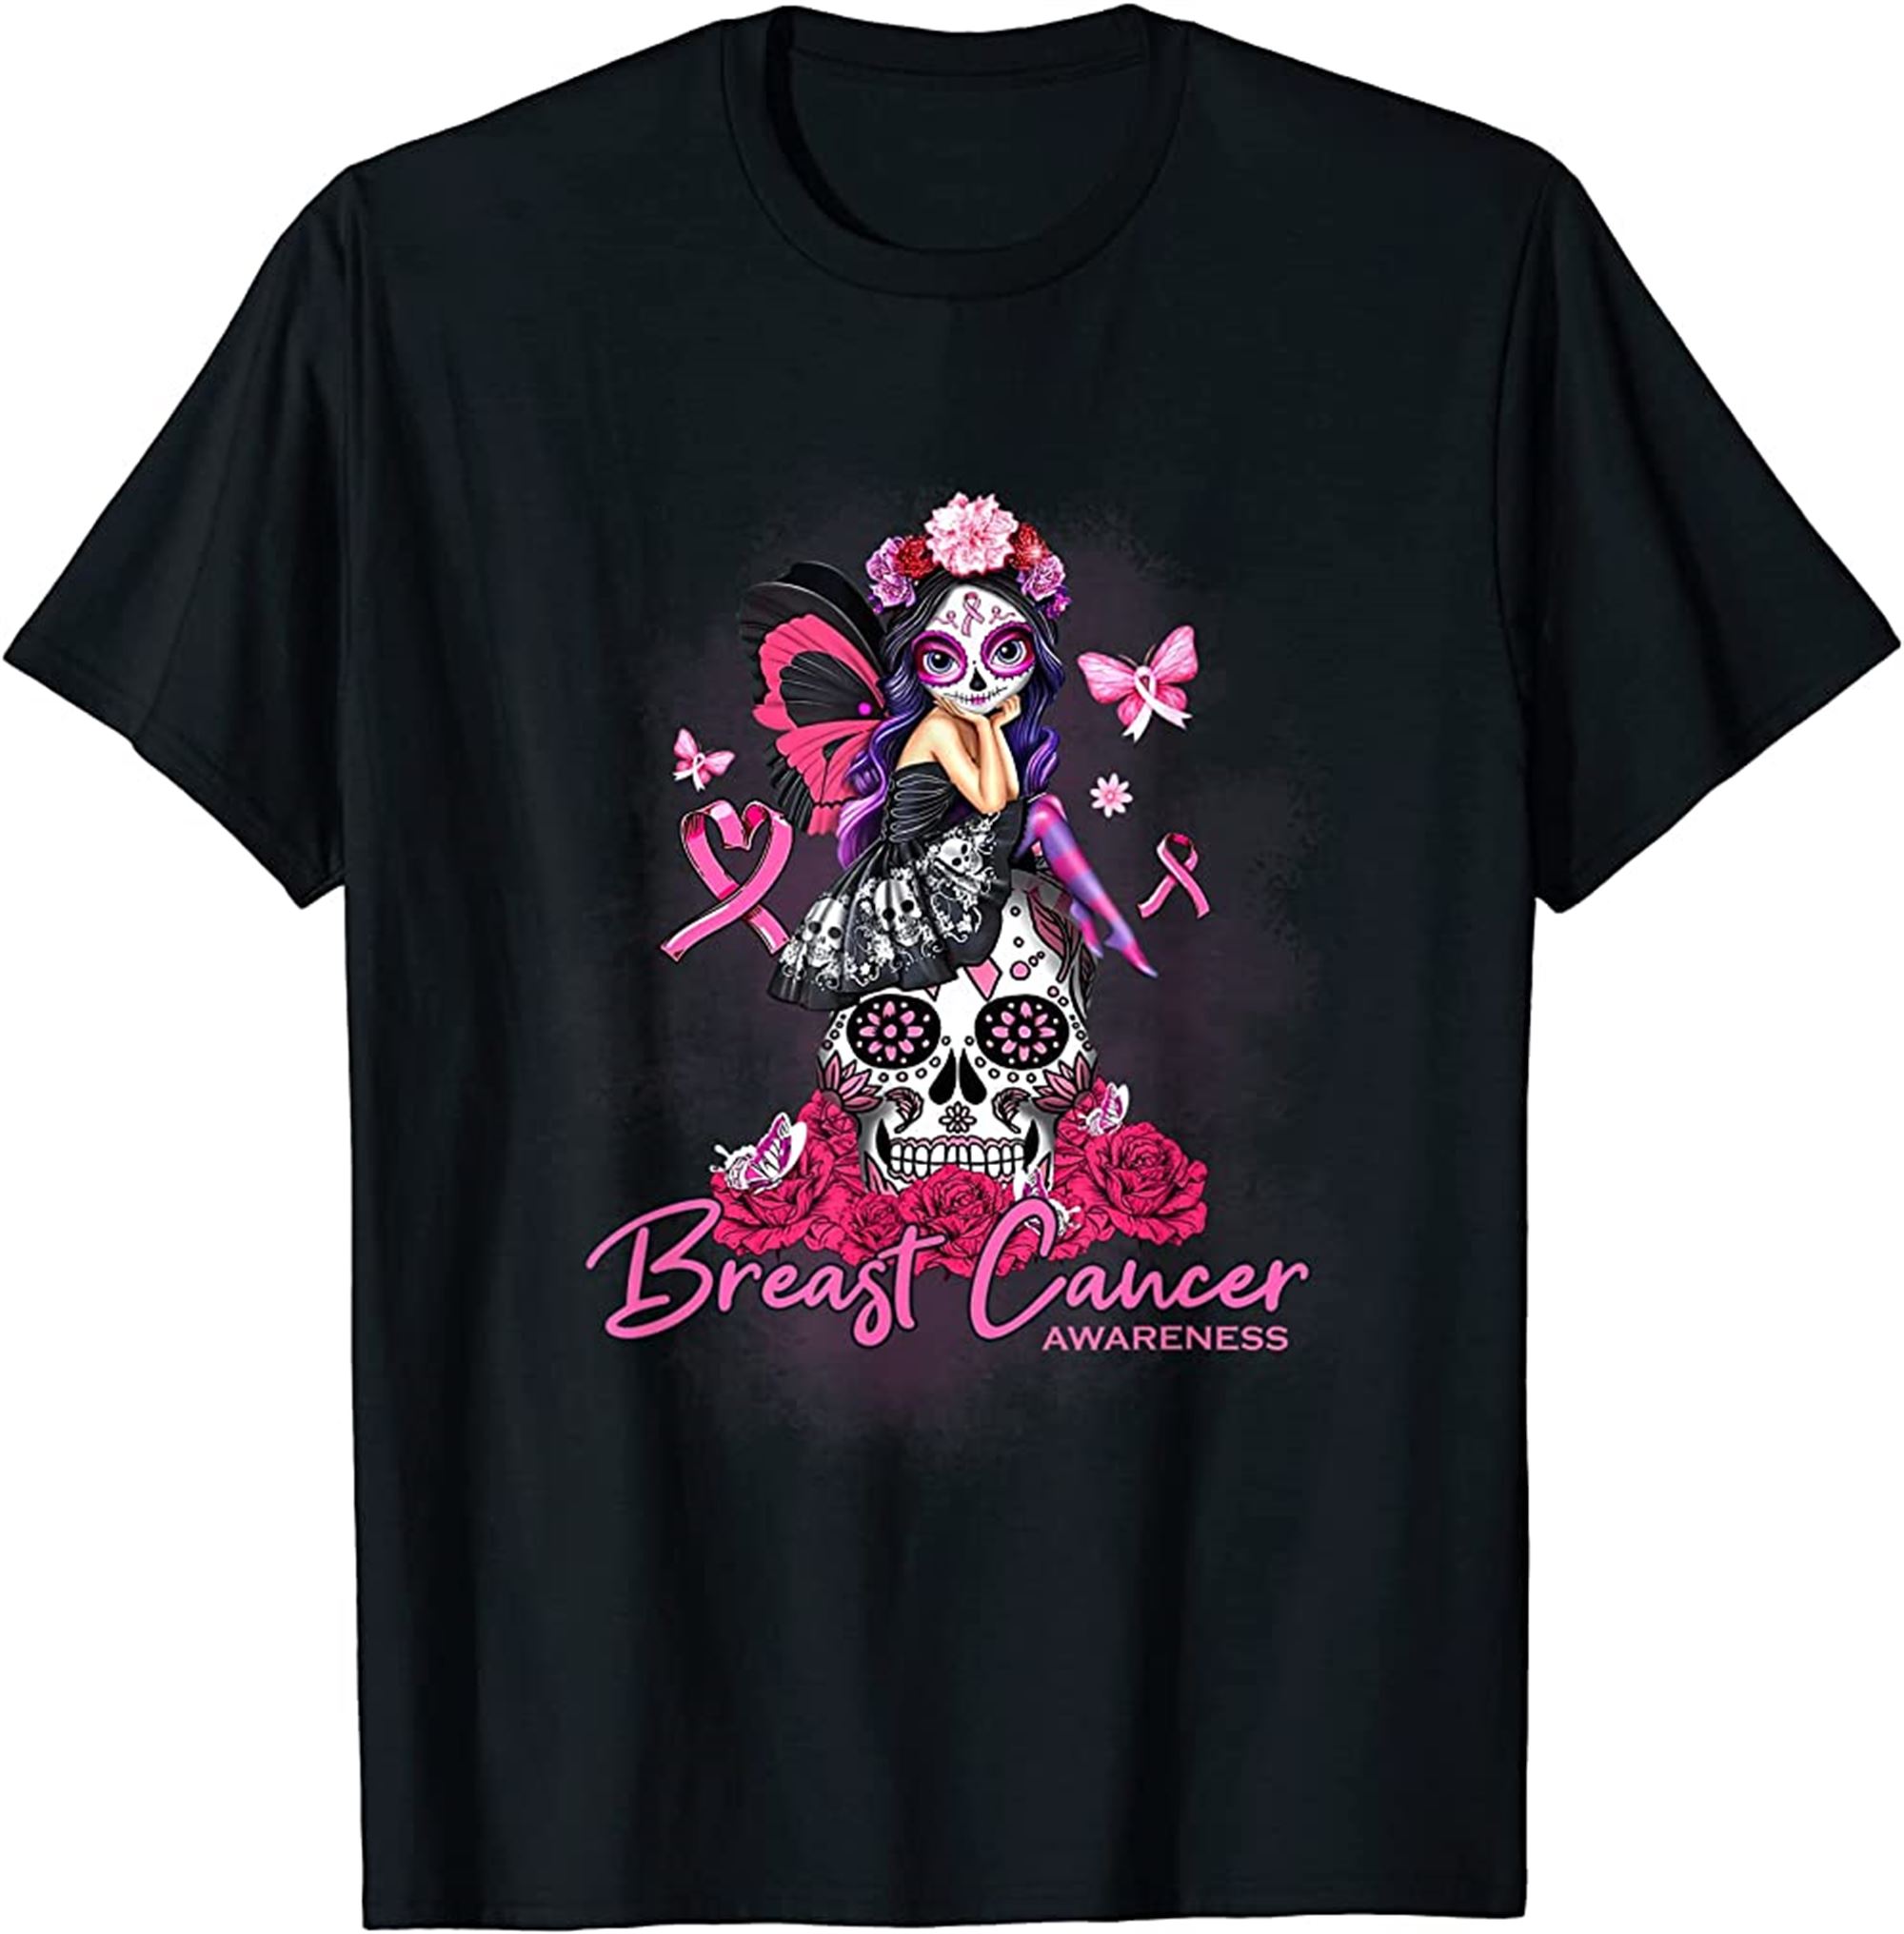 Sugar Skull Fight Breast Cancer Awareness Like A Girl T-shirt Plus Size Up To 5xl